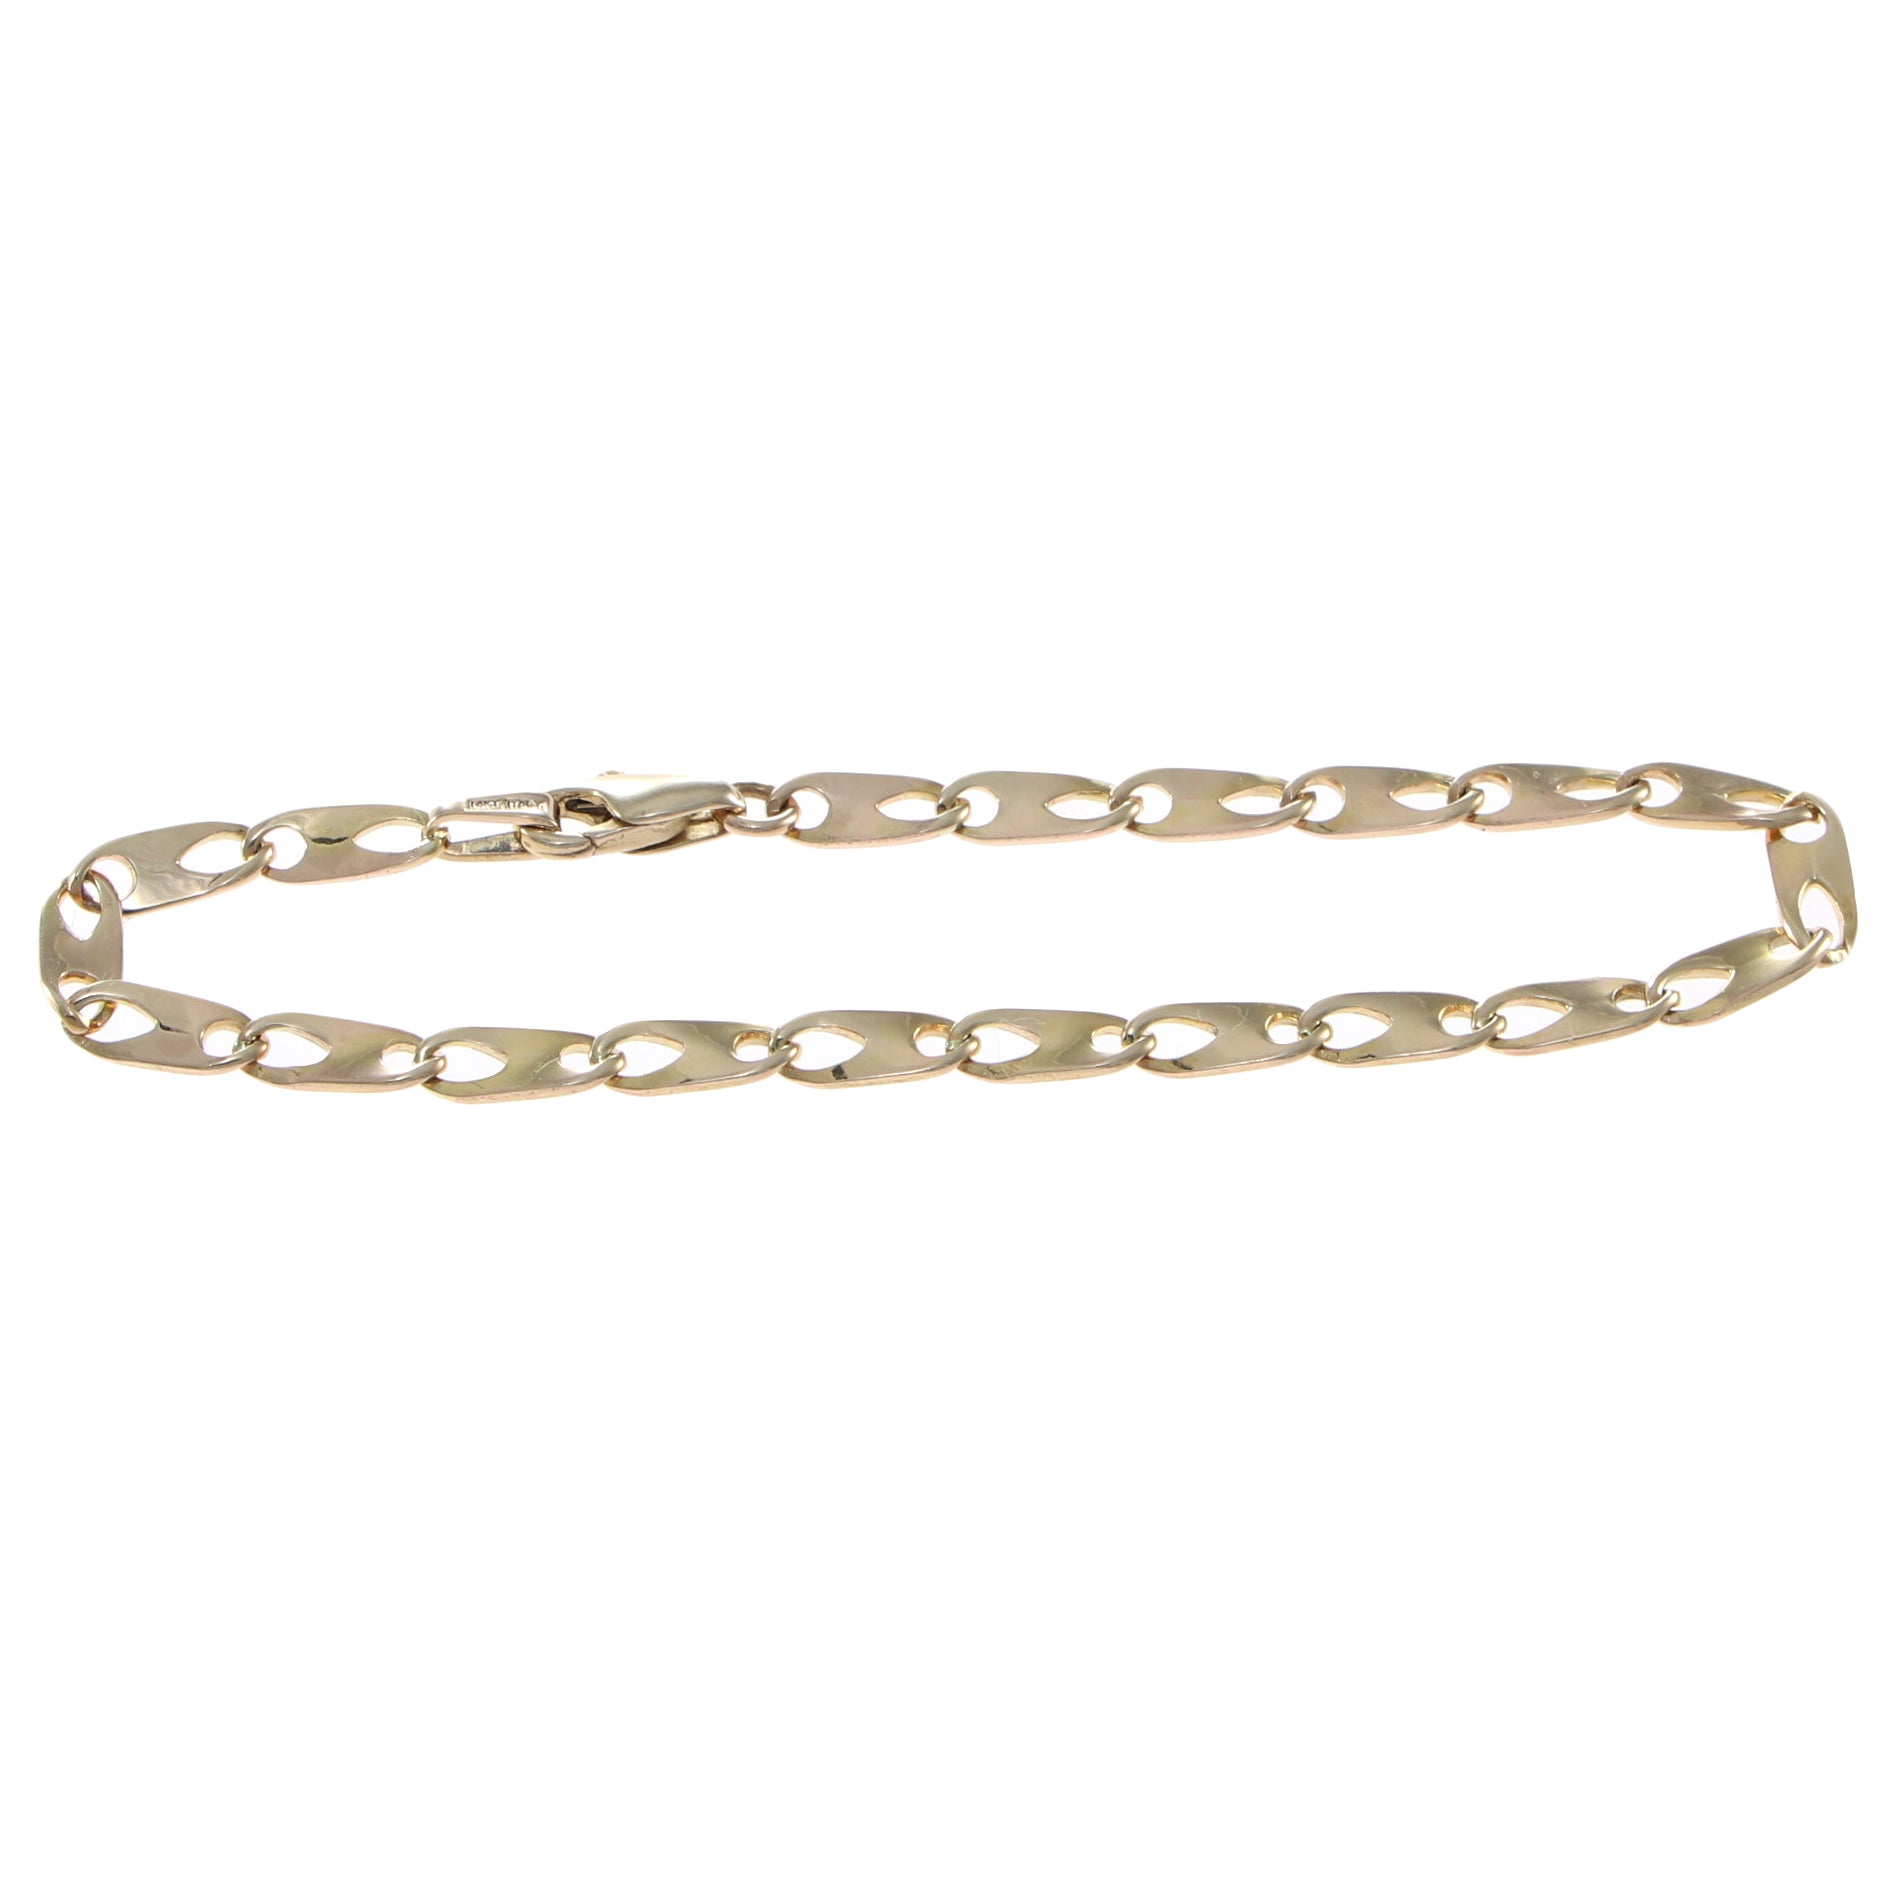 UNICRAFTALE 20pcs Oval Golden Links Stainless Steel Linking Ring 12.5x8.5mm  Inner Diameter Connector Charms for Bracelet Necklace Jewelry